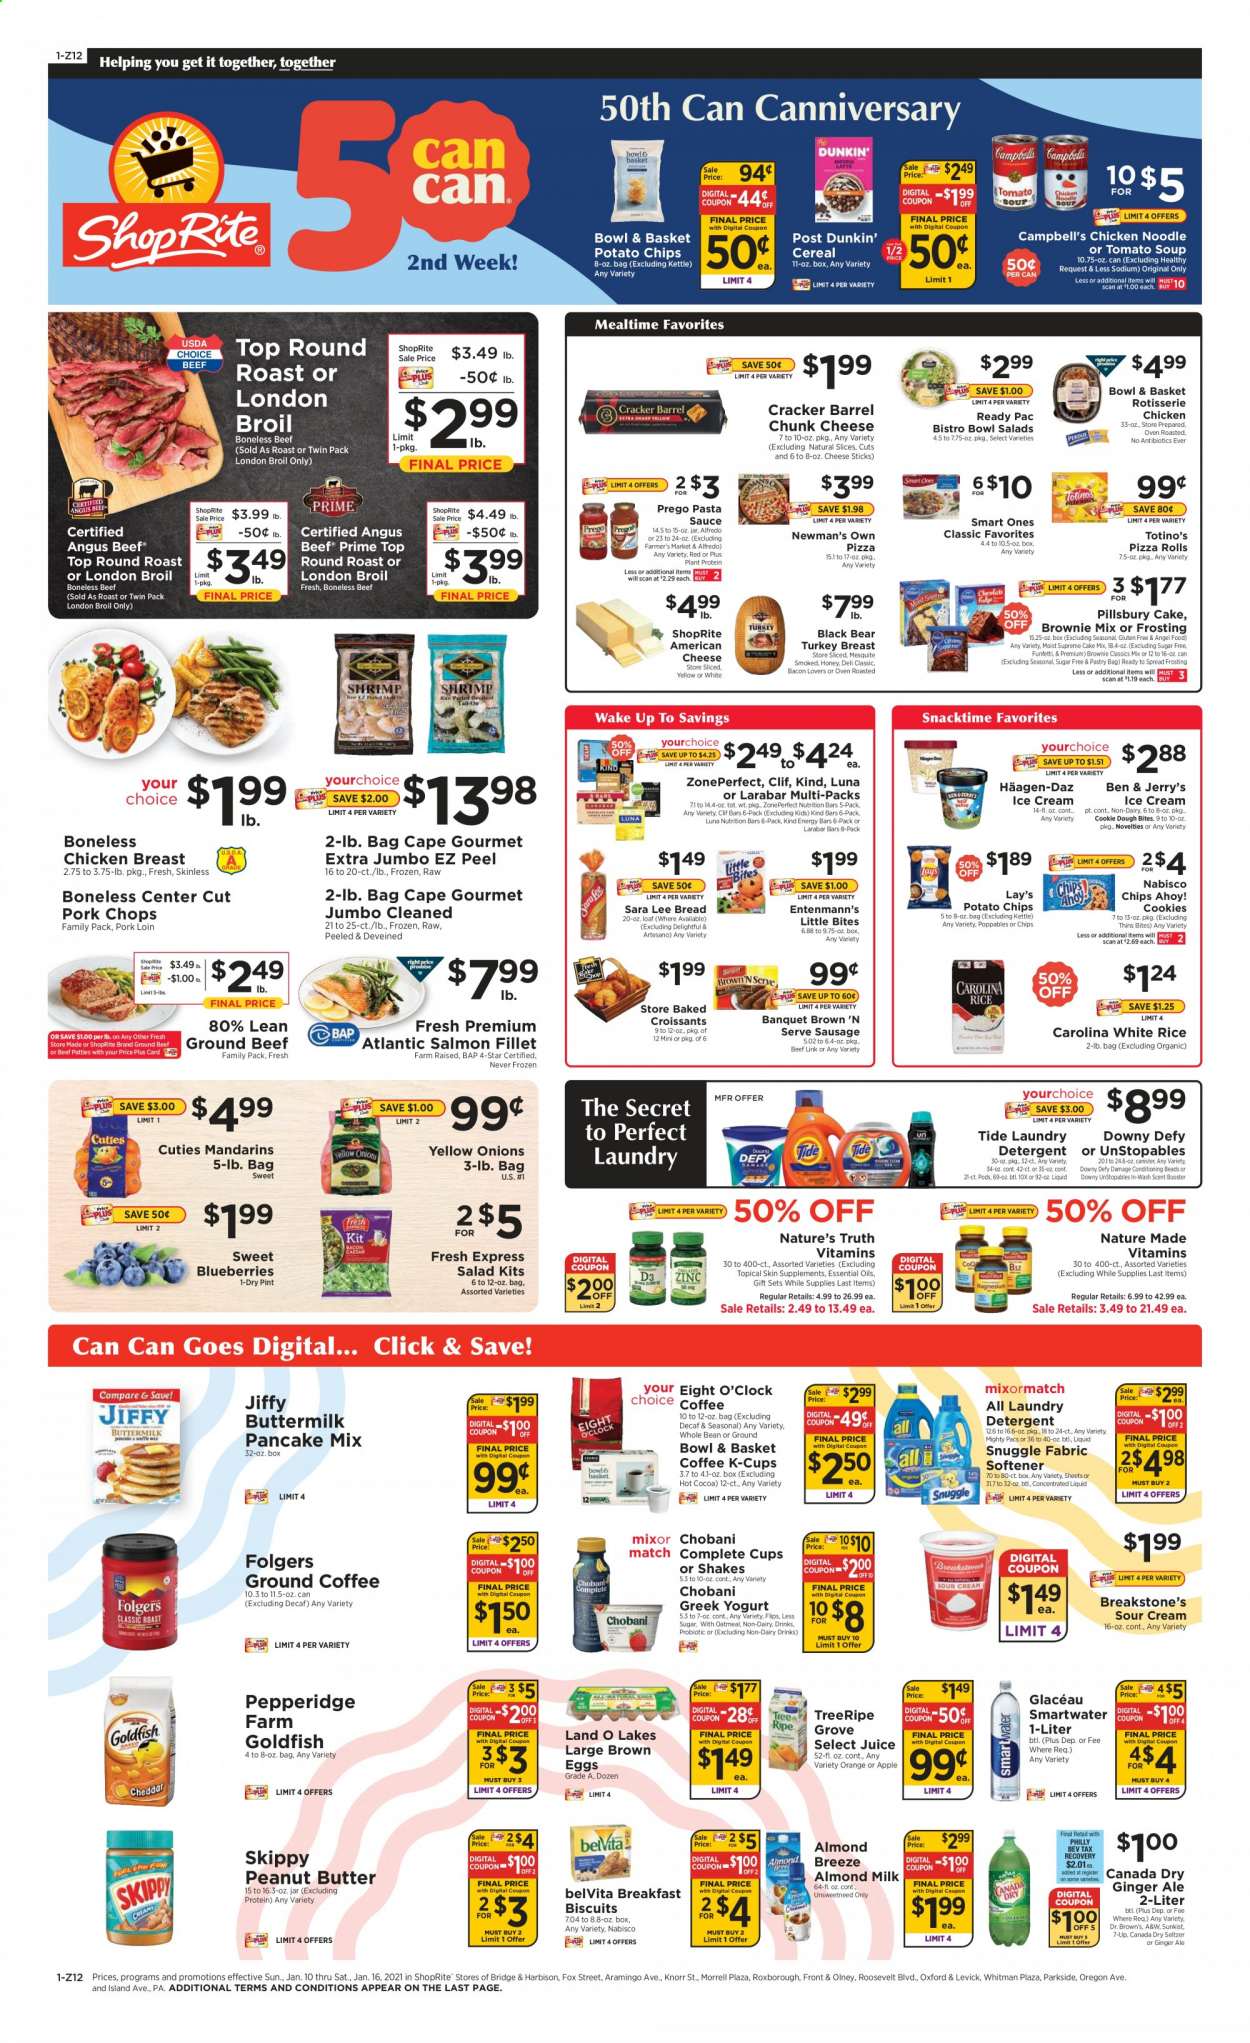 thumbnail - ShopRite Flyer - 01/10/2021 - 01/16/2021 - Sales products - blueberries, bread, pizza rolls, Sara Lee, brownie mix, cake mix, pancakes, Angel Food, Entenmann's, Little Bites, oranges, salmon, salmon fillet, Campbell's, tomato soup, pizza, soup, Knorr, salad, sauce, Pillsbury, Ready Pac, Bowl & Basket, bacon, sausage, Brown 'N Serve, american cheese, cheese, chunk cheese, greek yoghurt, yoghurt, Chobani, Almond Breeze, almond milk, buttermilk, shake, eggs, sour cream, ice cream, Häagen-Dazs, Ben & Jerry's, cookie dough, cookies, crackers, biscuit, Chips Ahoy!, potato chips, Lay’s, Snacktime, Thins, cheese sticks, frosting, oatmeal, mandarines, cereals, nutrition bar, energy bar, belVita, rice, white rice, noodles, pasta sauce, honey, peanut butter, Canada Dry, ginger ale, juice, 7UP, Dr. Brown's, A&W, seltzer water, hot cocoa, Folgers, coffee capsules, K-Cups, Eight O'Clock, turkey breast, chicken breasts, beef meat, ground beef, round roast, pork chops, pork loin, pork meat, detergent, Snuggle, Tide, Unstopables, fabric softener, laundry detergent, Daz Powder, conditioning beads, bowl, essential oils, Nature Made, Nature's Truth, plant protein. Page 1.